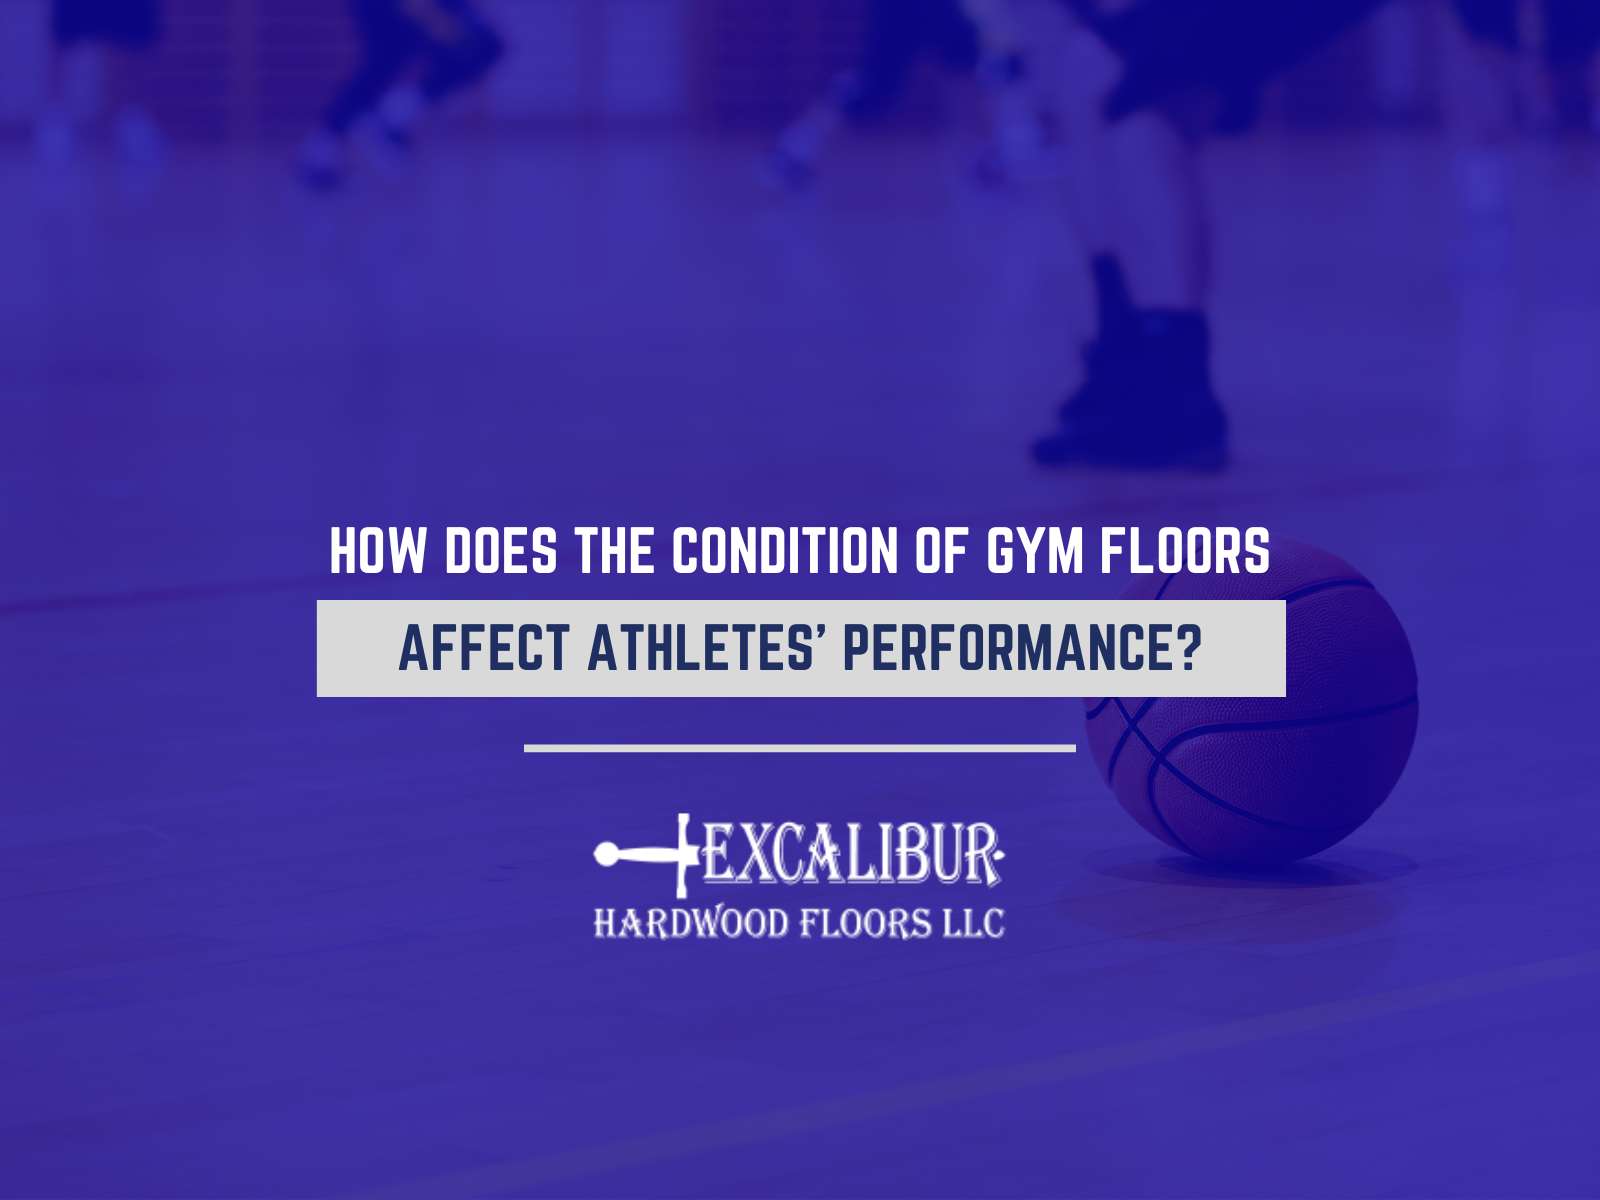 How Does The Condition Of Gym Floors Affect Athletes' Performance?